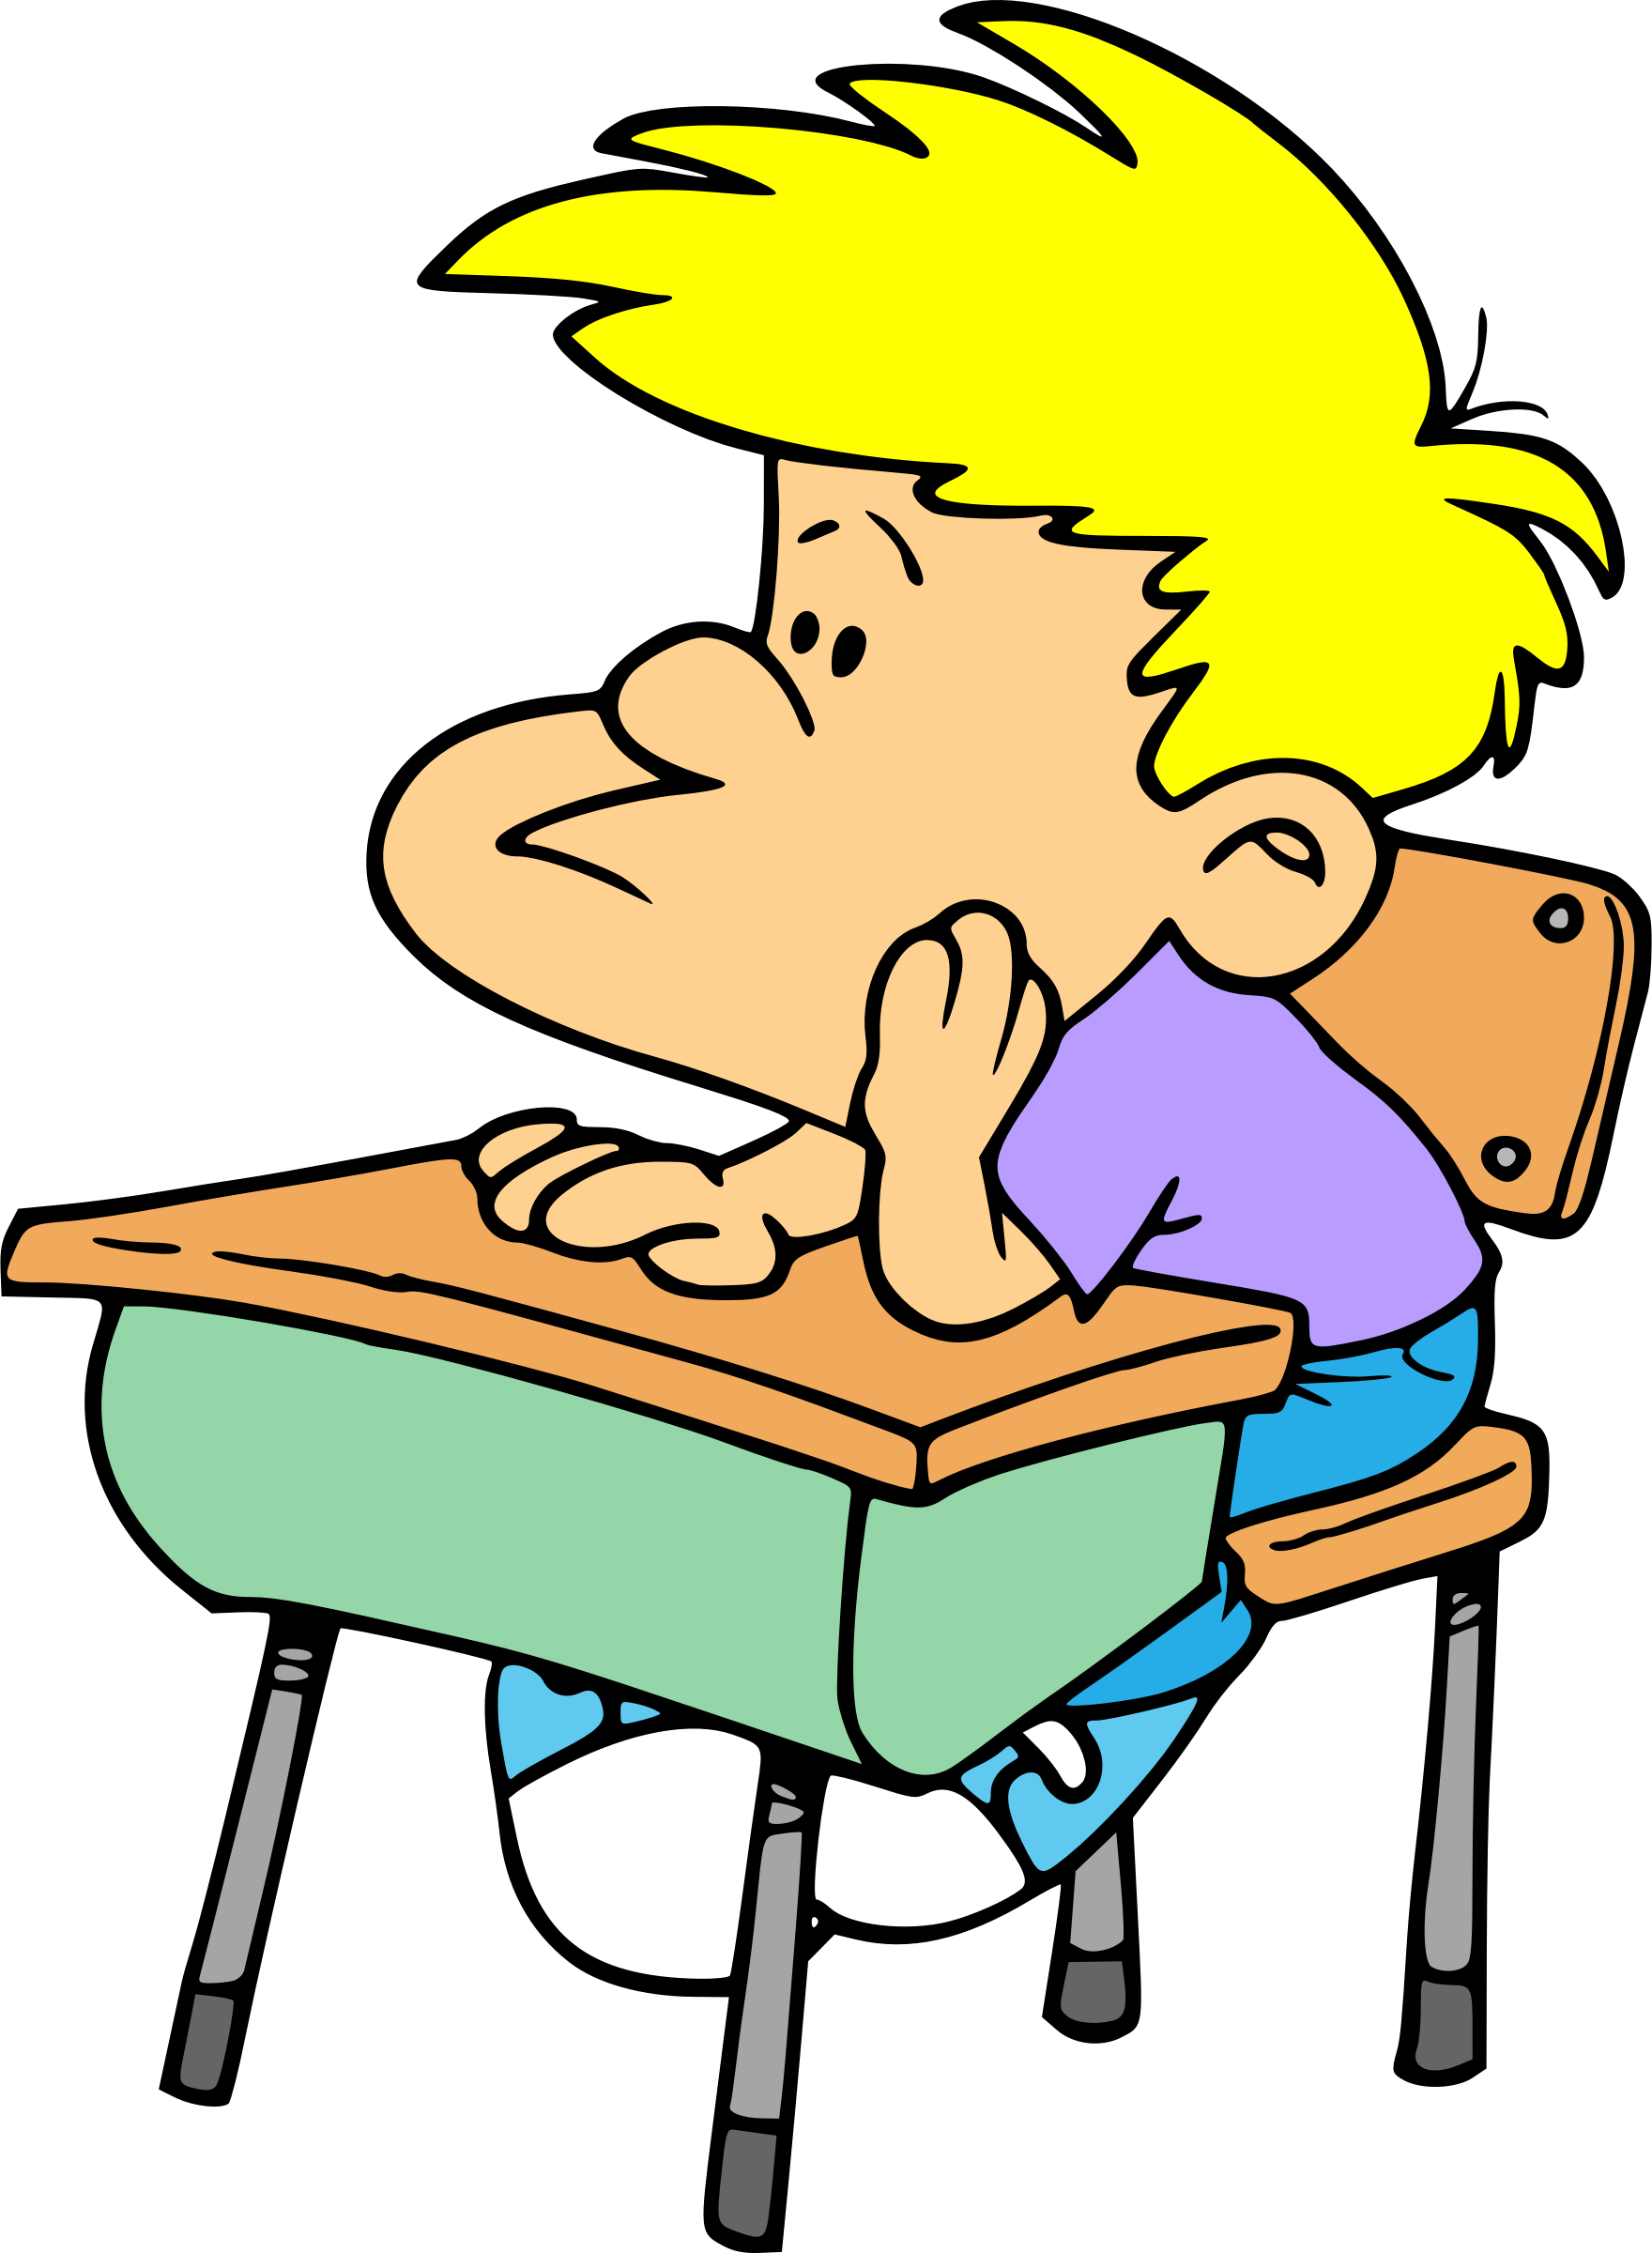 Bored student big image. Daydreaming clipart cartoon